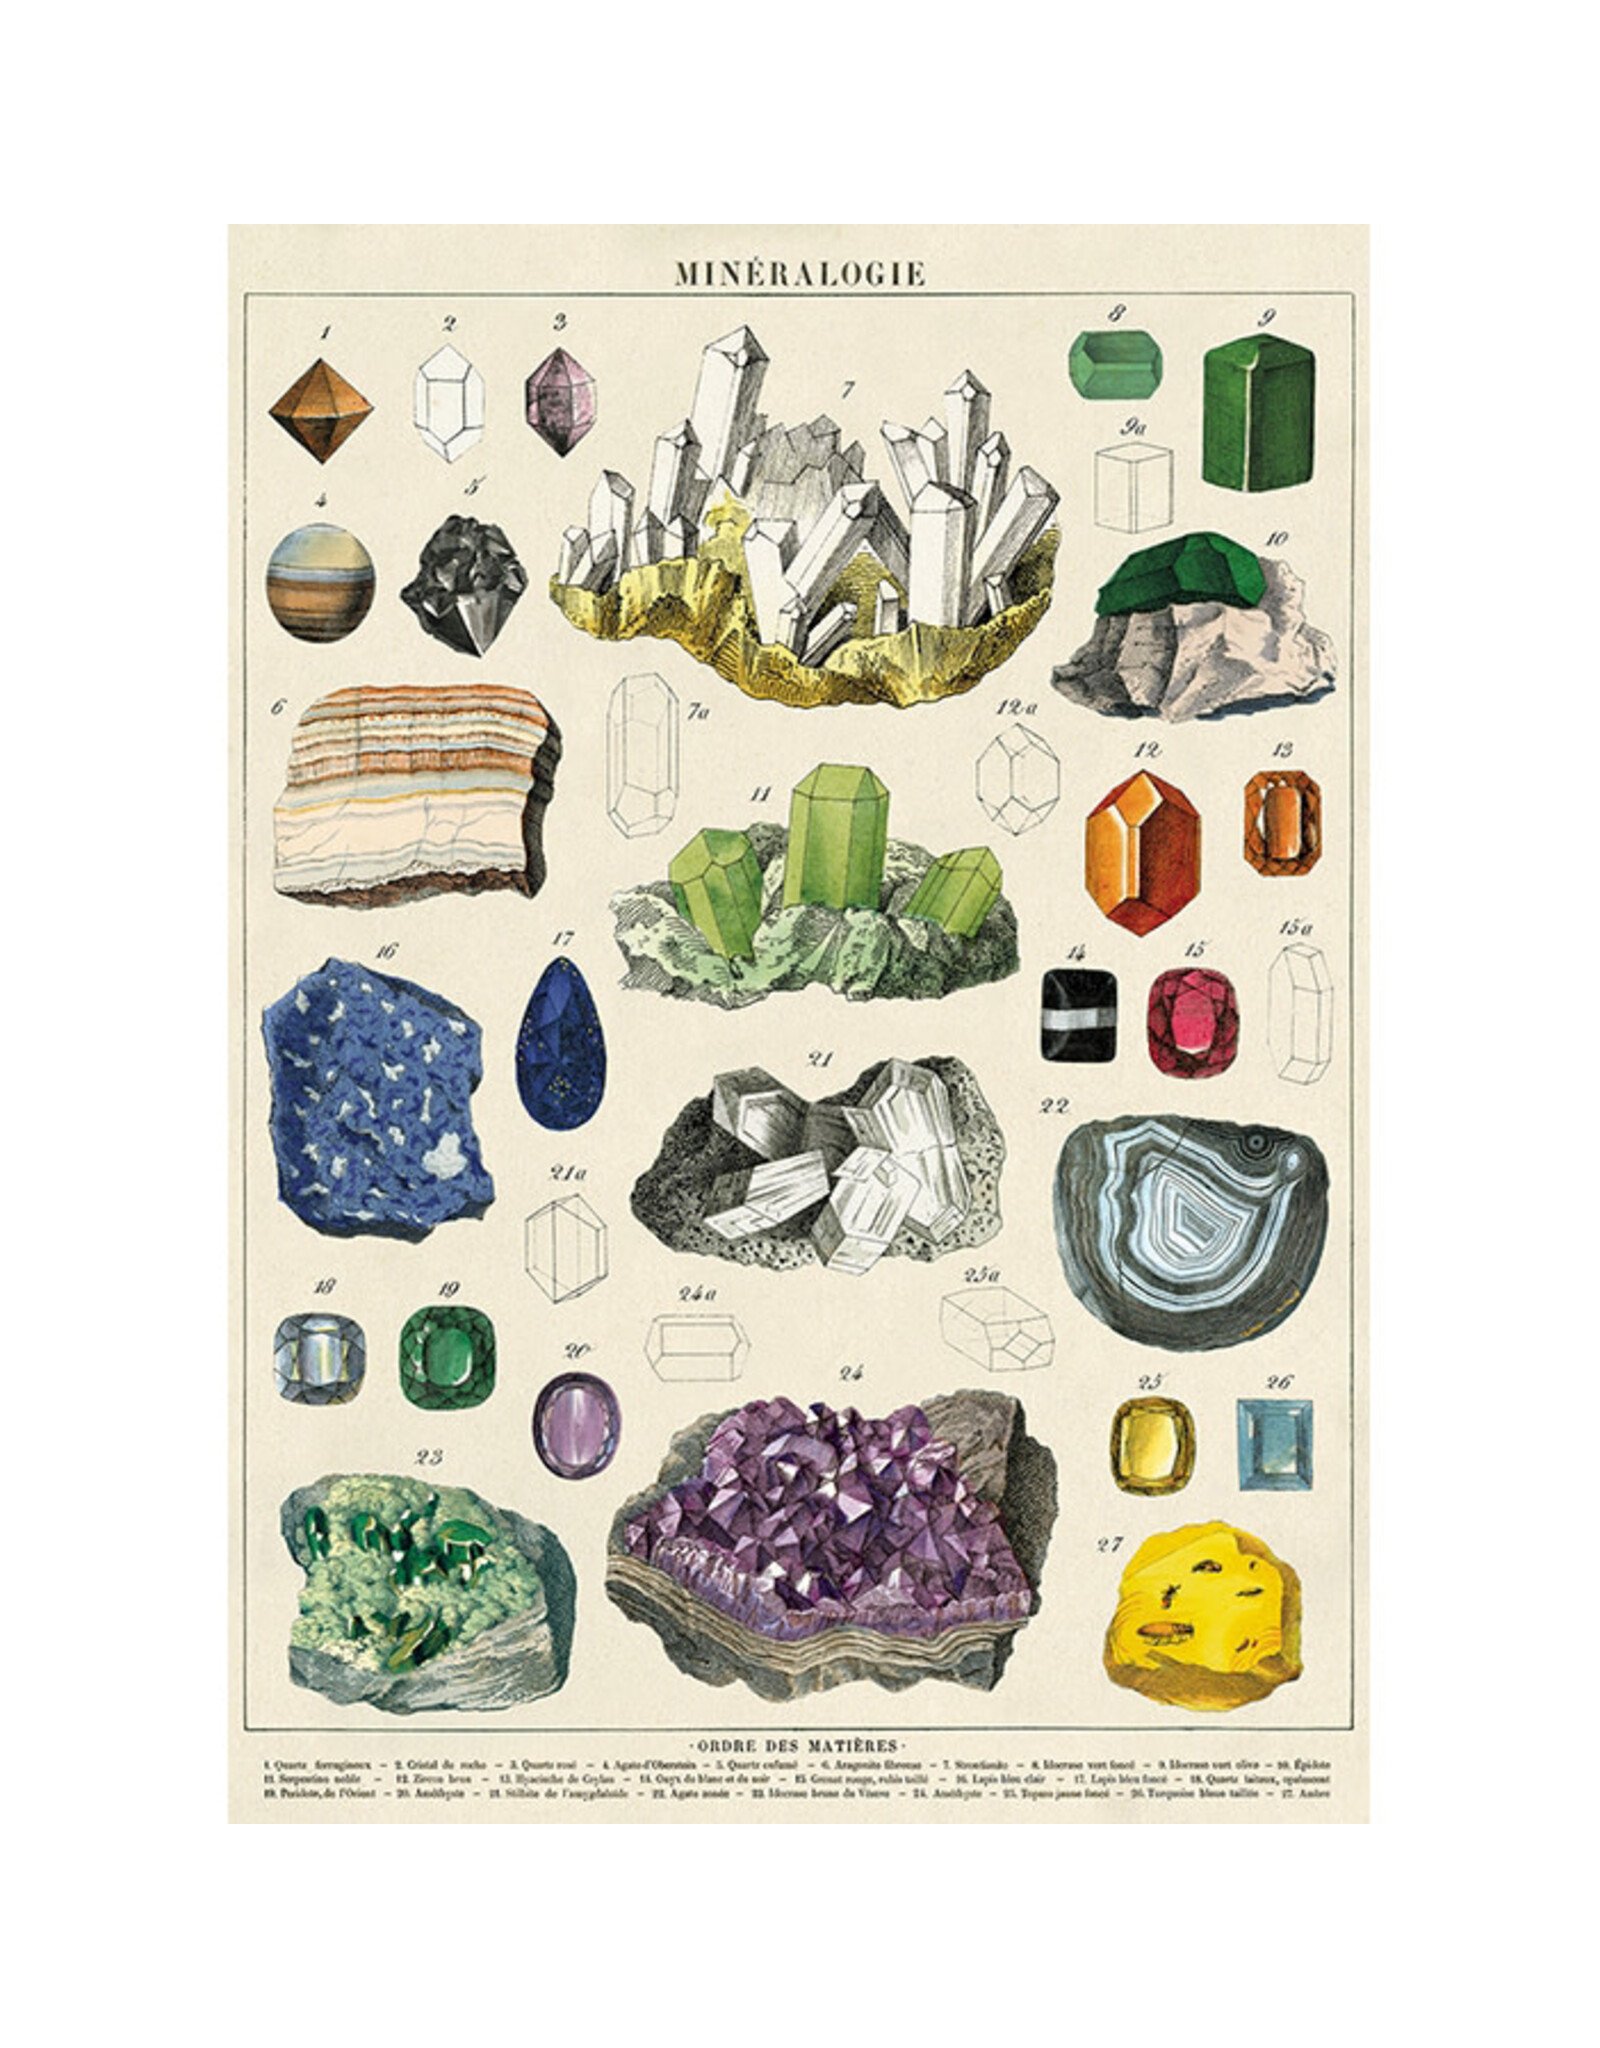 Cavallini Papers & Co. Wrap Mineralogie